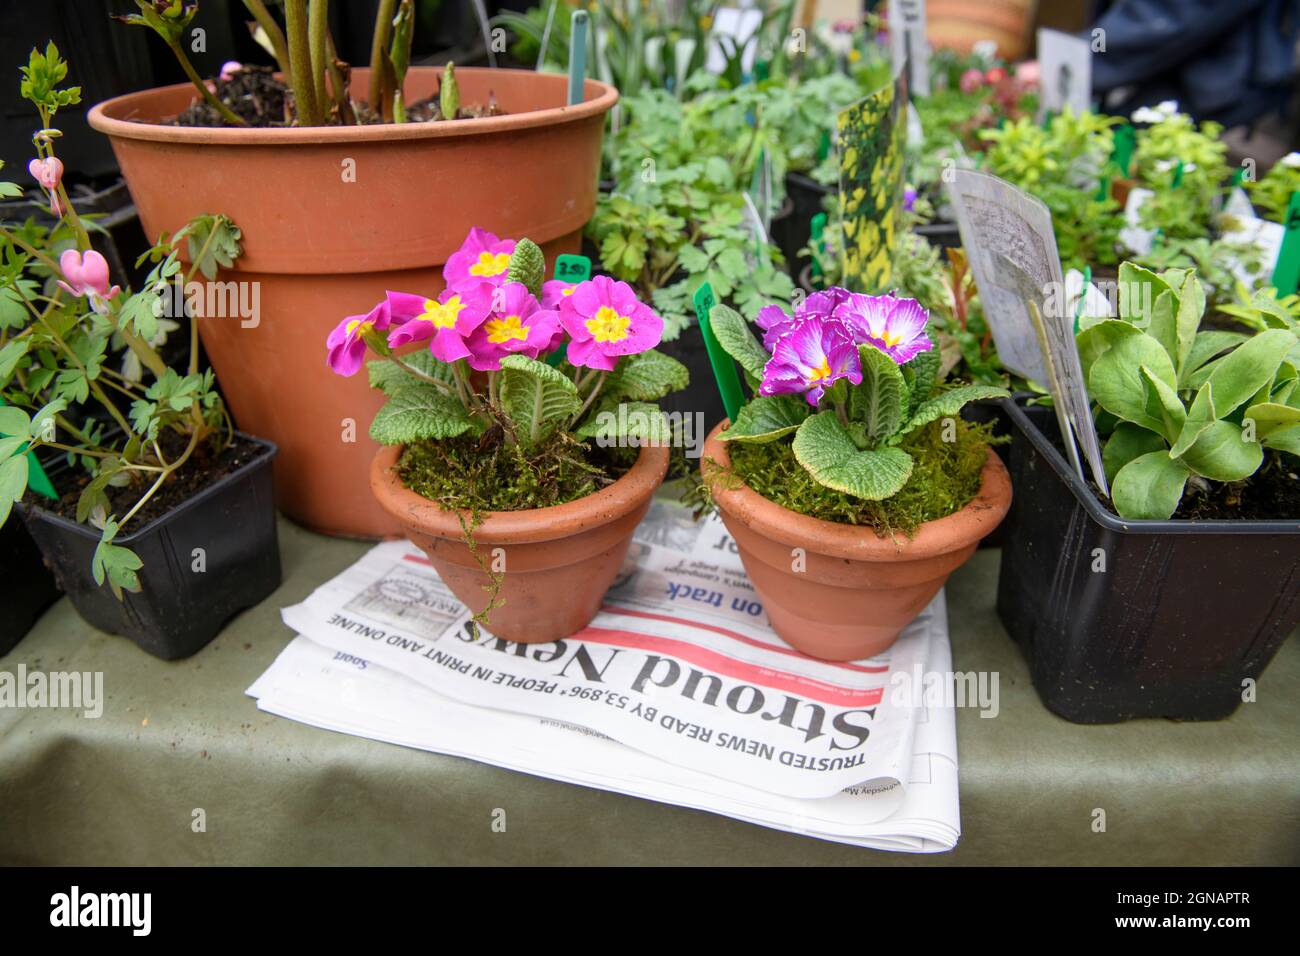 The local paper 'Stroud News & Journal' on a flower stall at the Stroud farmers Market, Gloucestershire UK Stock Photo